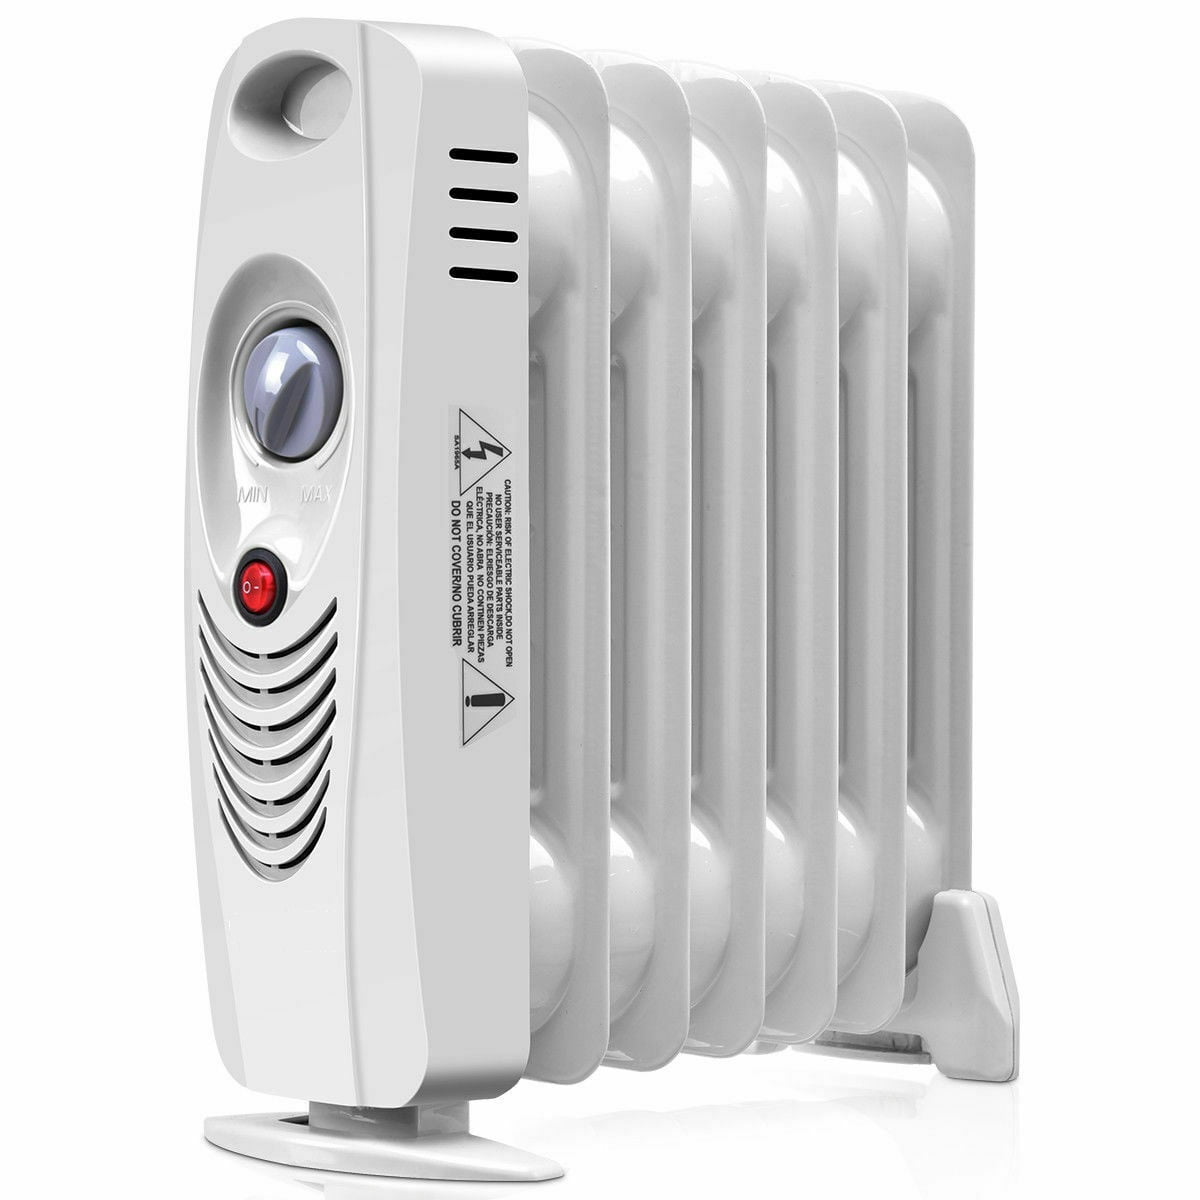 7 Fin 1500W 240V Portable Electric Oil Filled Radiator Electrical Caravan Heater